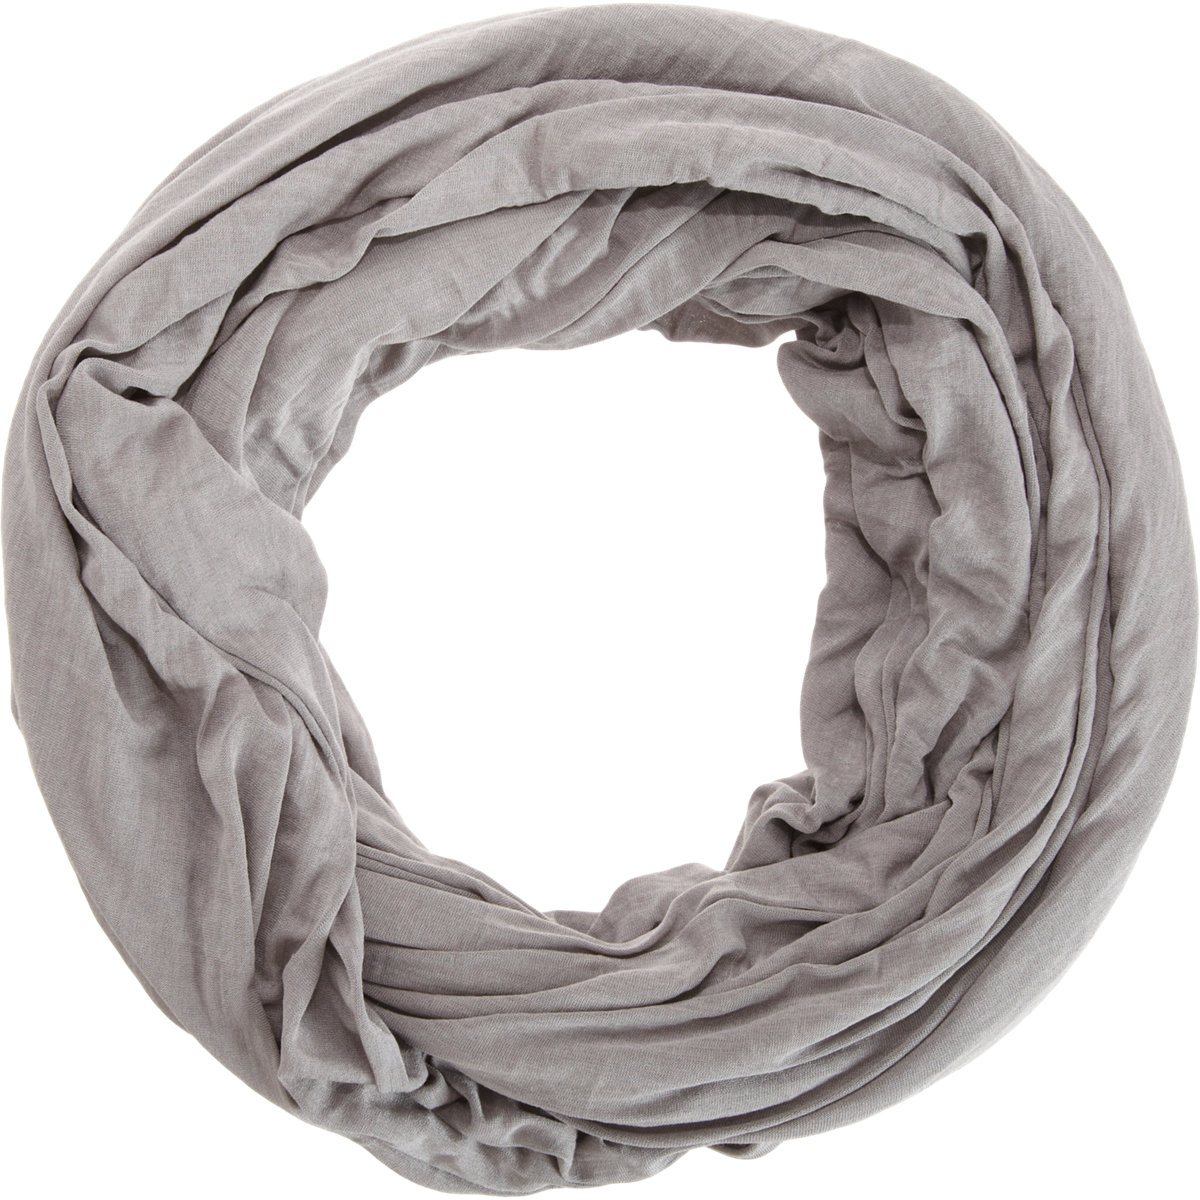 Botto Giuseppe Infinity Scarf in Gray | Lyst